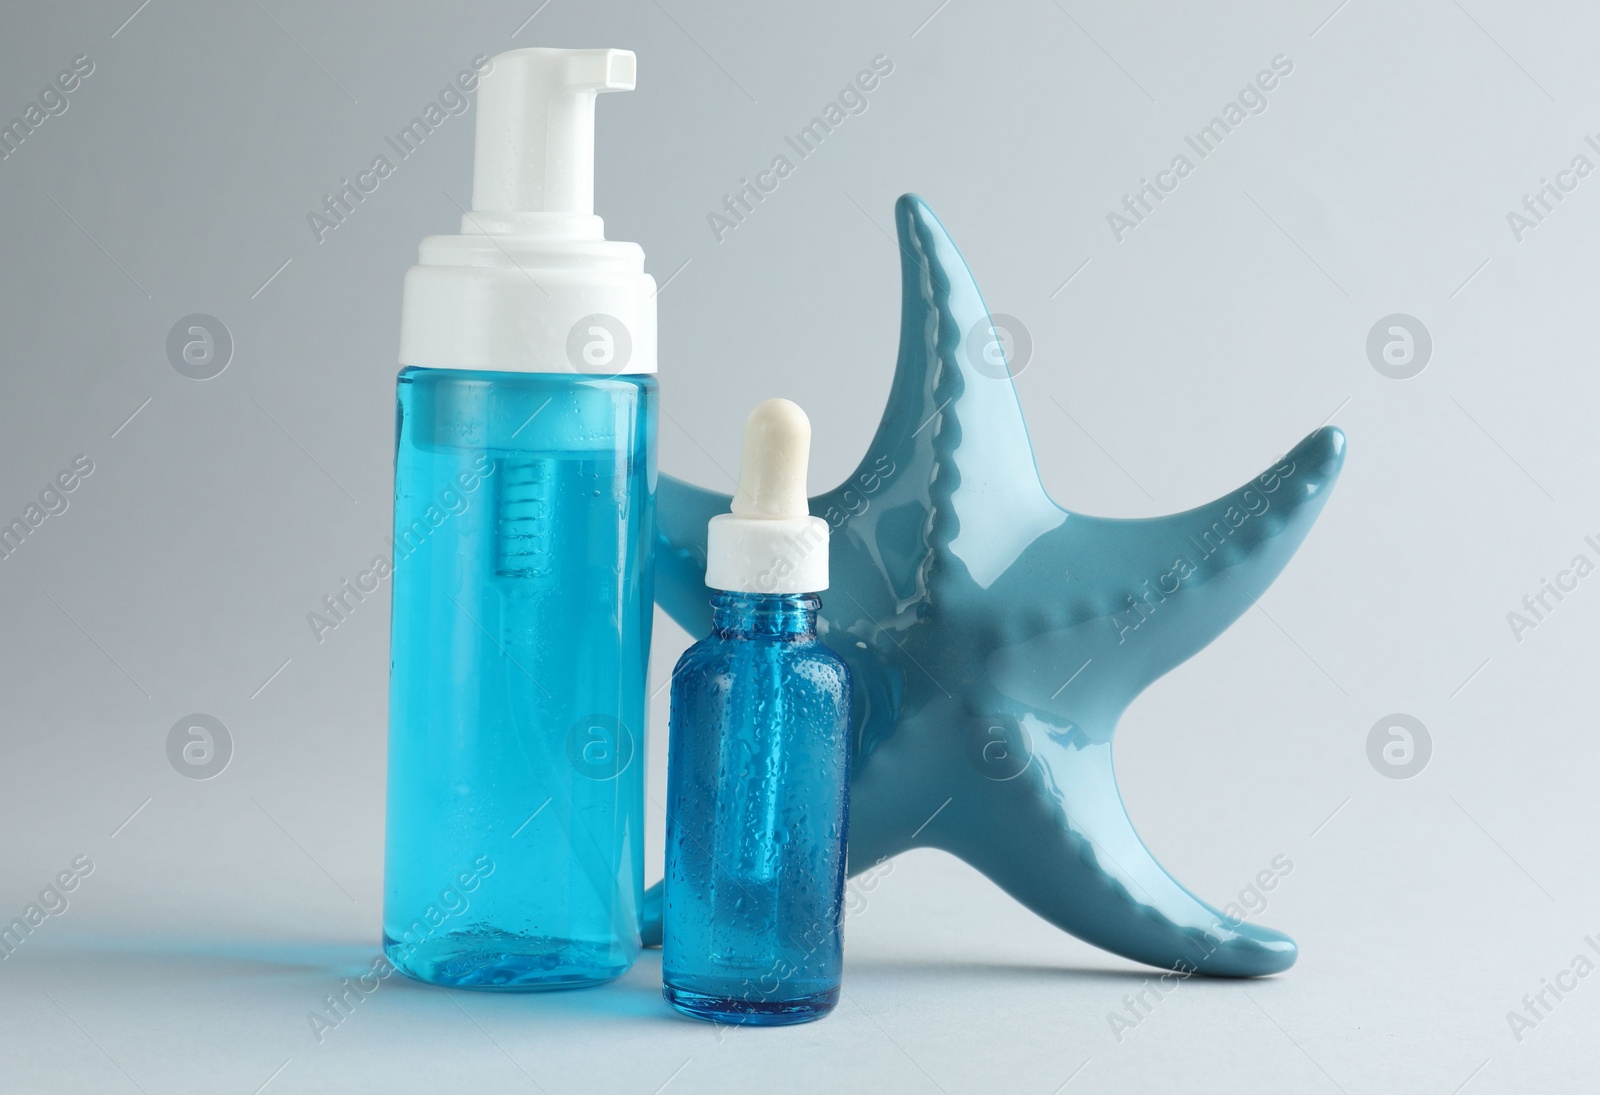 Photo of Bottles of cosmetic products and decorative starfish on light grey background